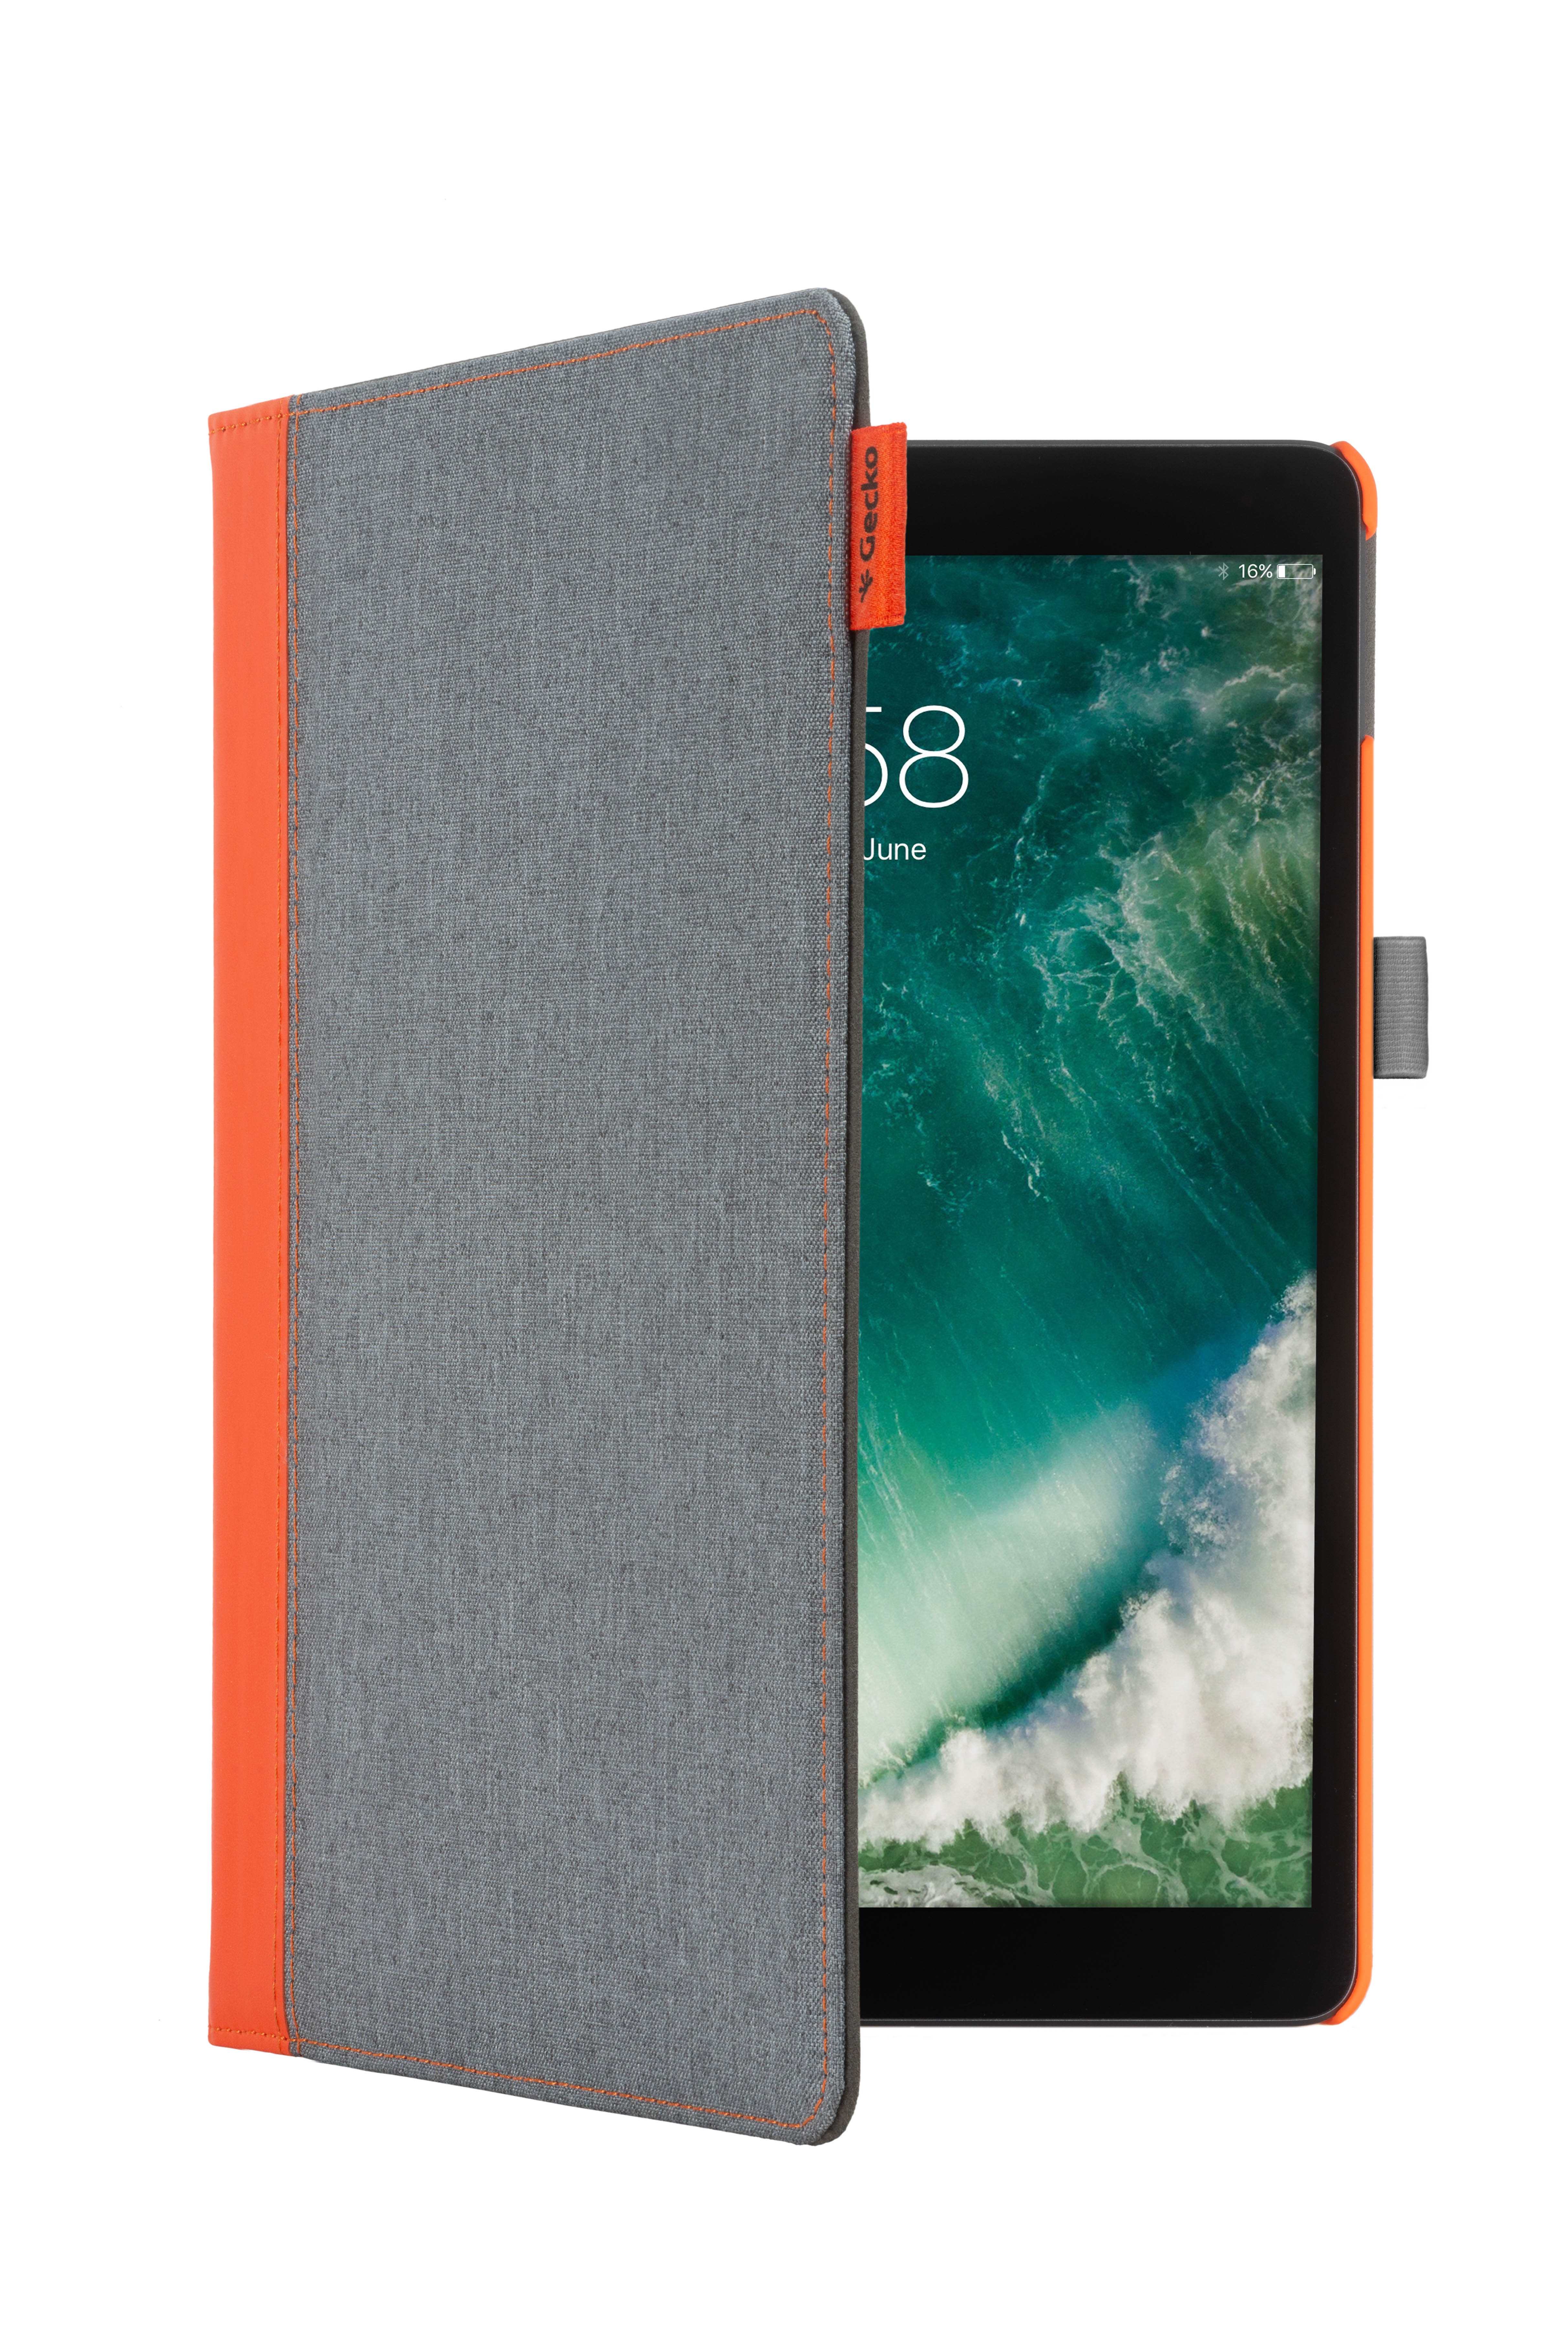 Air Pro iPad COVERS GECKO Hülle (2017) Apple Grau,Orange PU Leather, 10.5 iPad (2019),Apple Tablet Cover Bookcover Easy-Click für